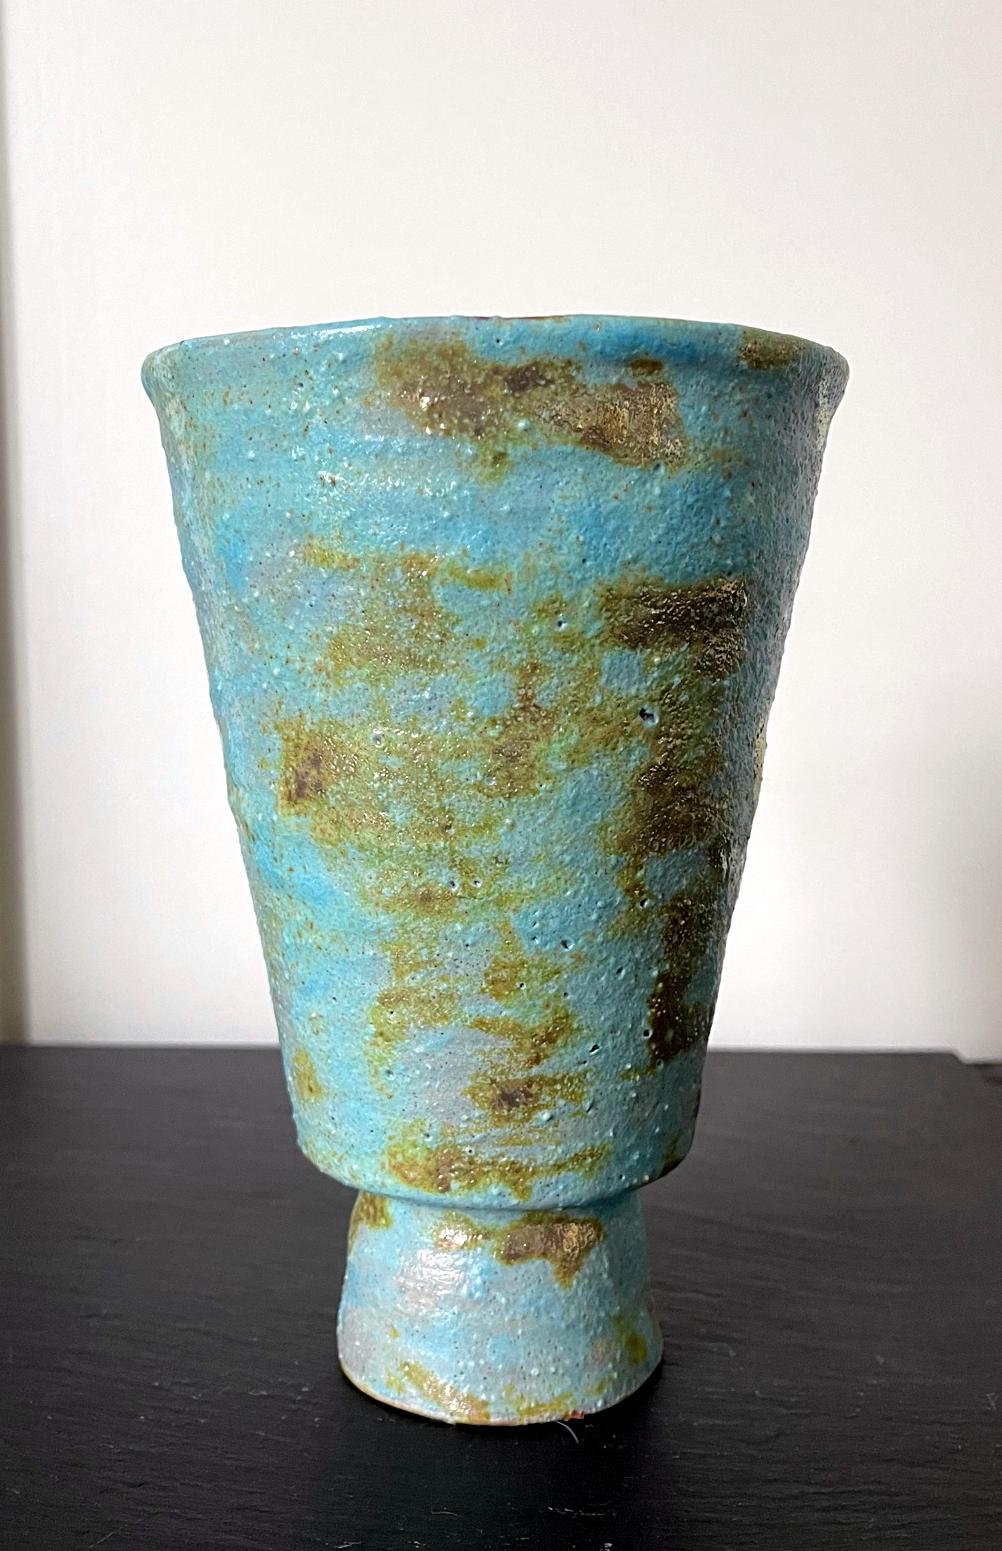 A bespoken ceramic vase by American artist and studio potter Beatrice Wood (1893-1998). The piece, circa 1960-80s, is covered in a beautiful turquoise color volcanic glaze with splashes of metallic gold luster patches. Signed on the bottom 